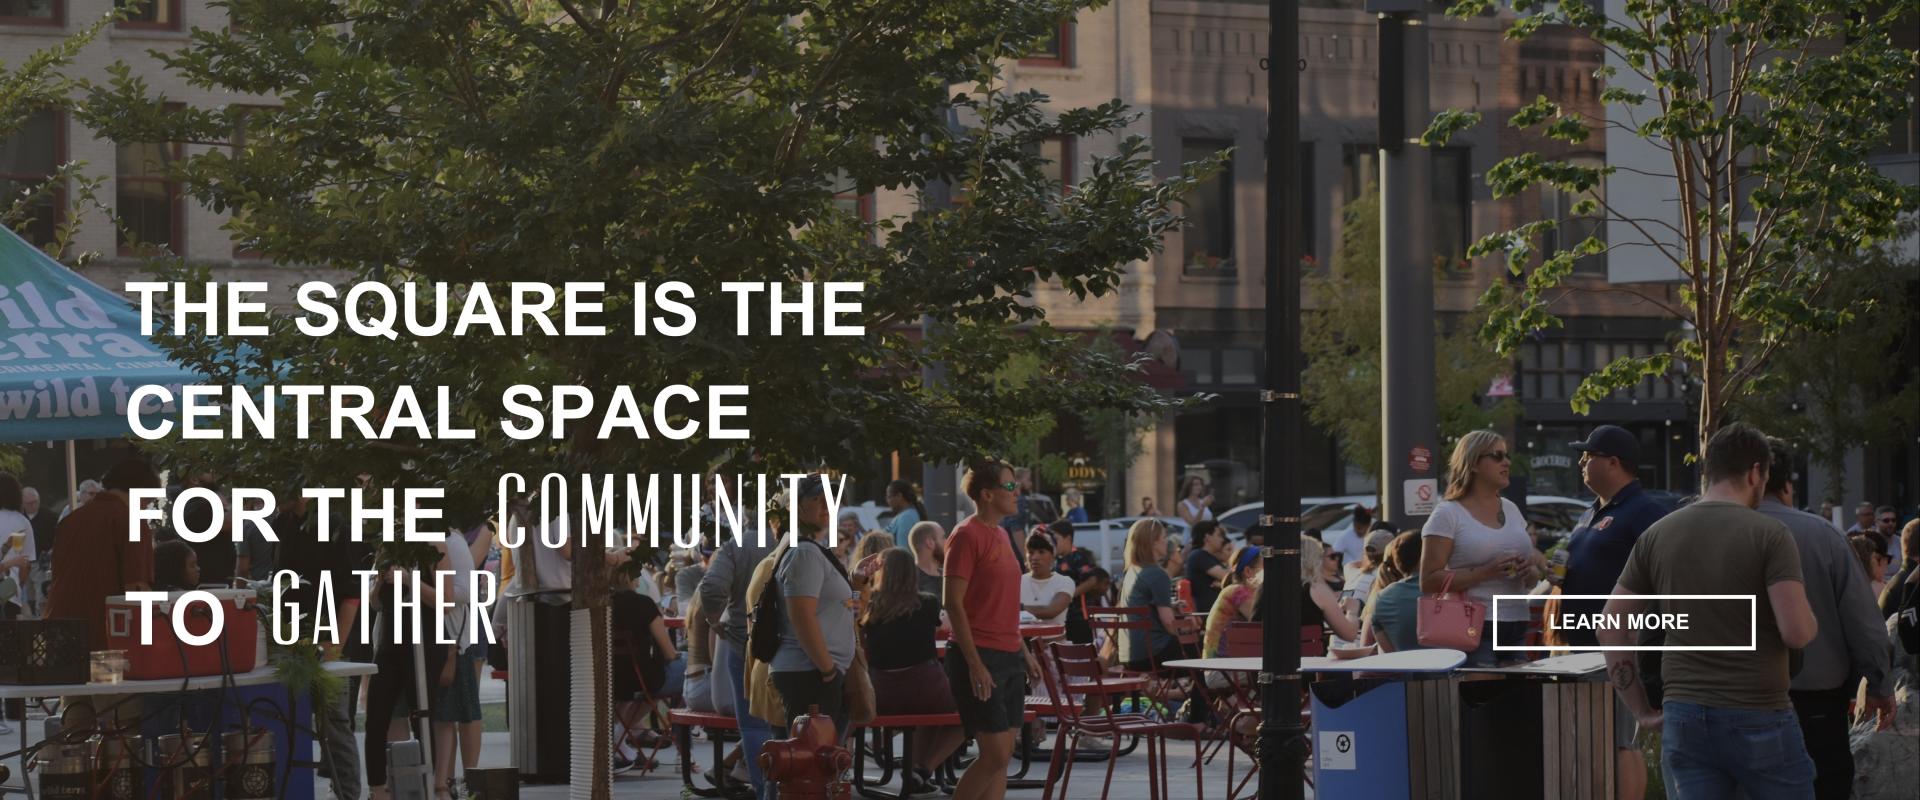 This graphic has text that says "The square is the central space for the community to gather" with a button to learn more